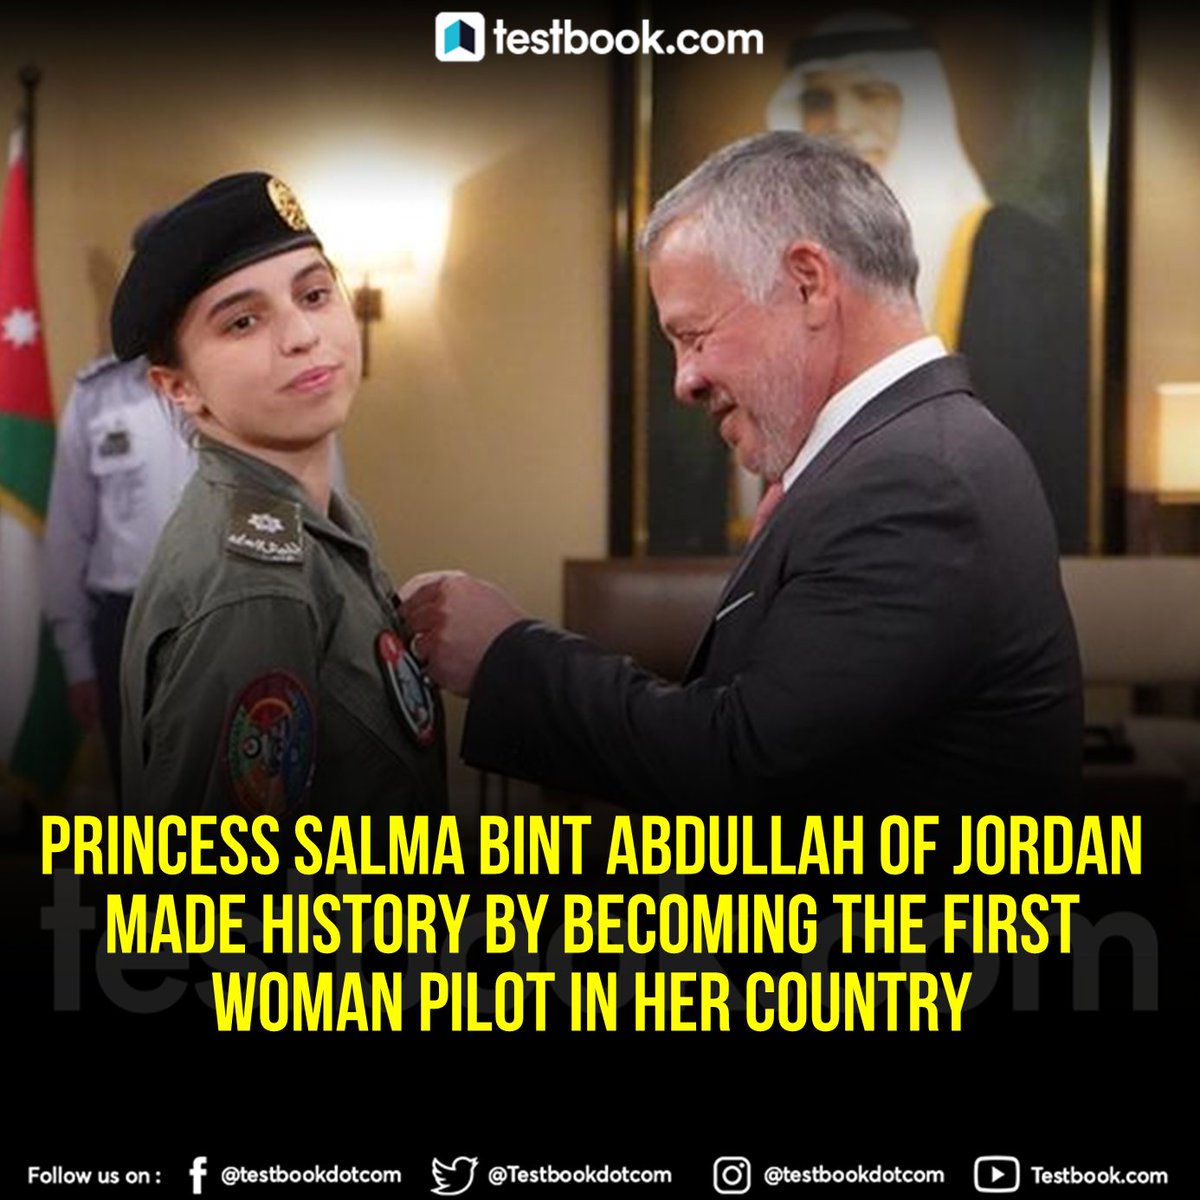 The 19-year-old Princess Salma completed her pilot training on fixed-wing aircraft with Jordanian Armed Forces.
#pilot #jordan #Princesssalma #JordanianArmedForces #ArmedForces #GirlPower #currentAffairs #upsc #dailycurrentaffairs #upscmotivation #CivilService #CivilServices